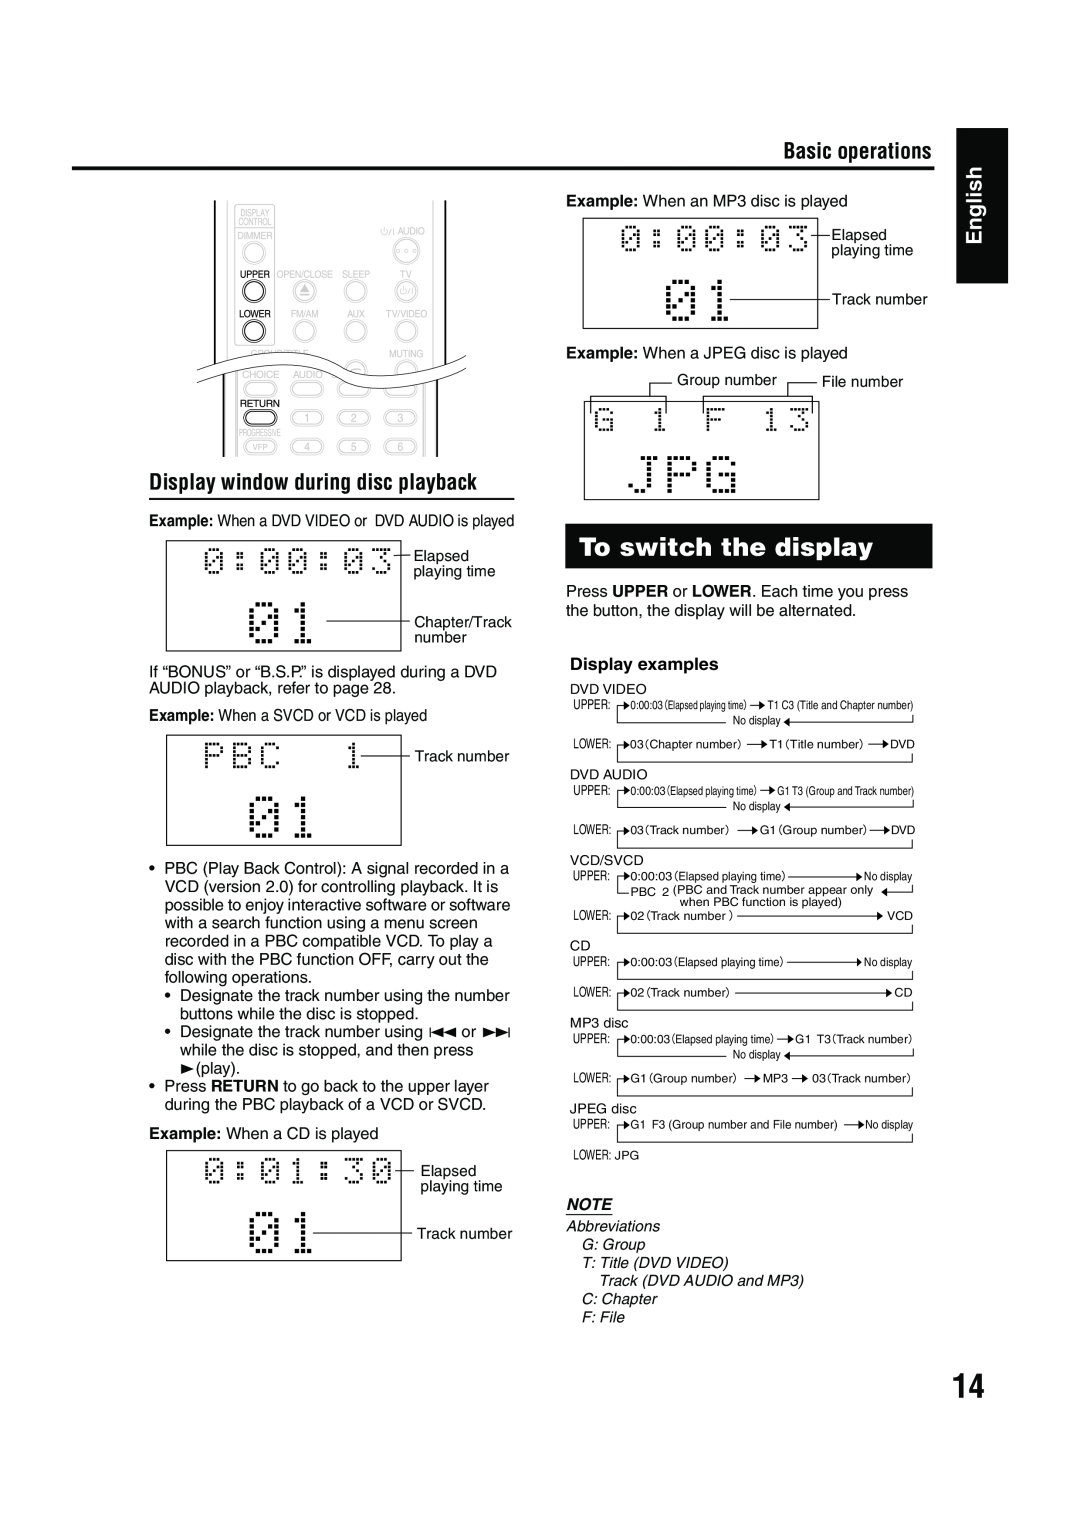 JVC EX-A1 manual To switch the display, Display window during disc playback, Display examples, Basic operations, English 